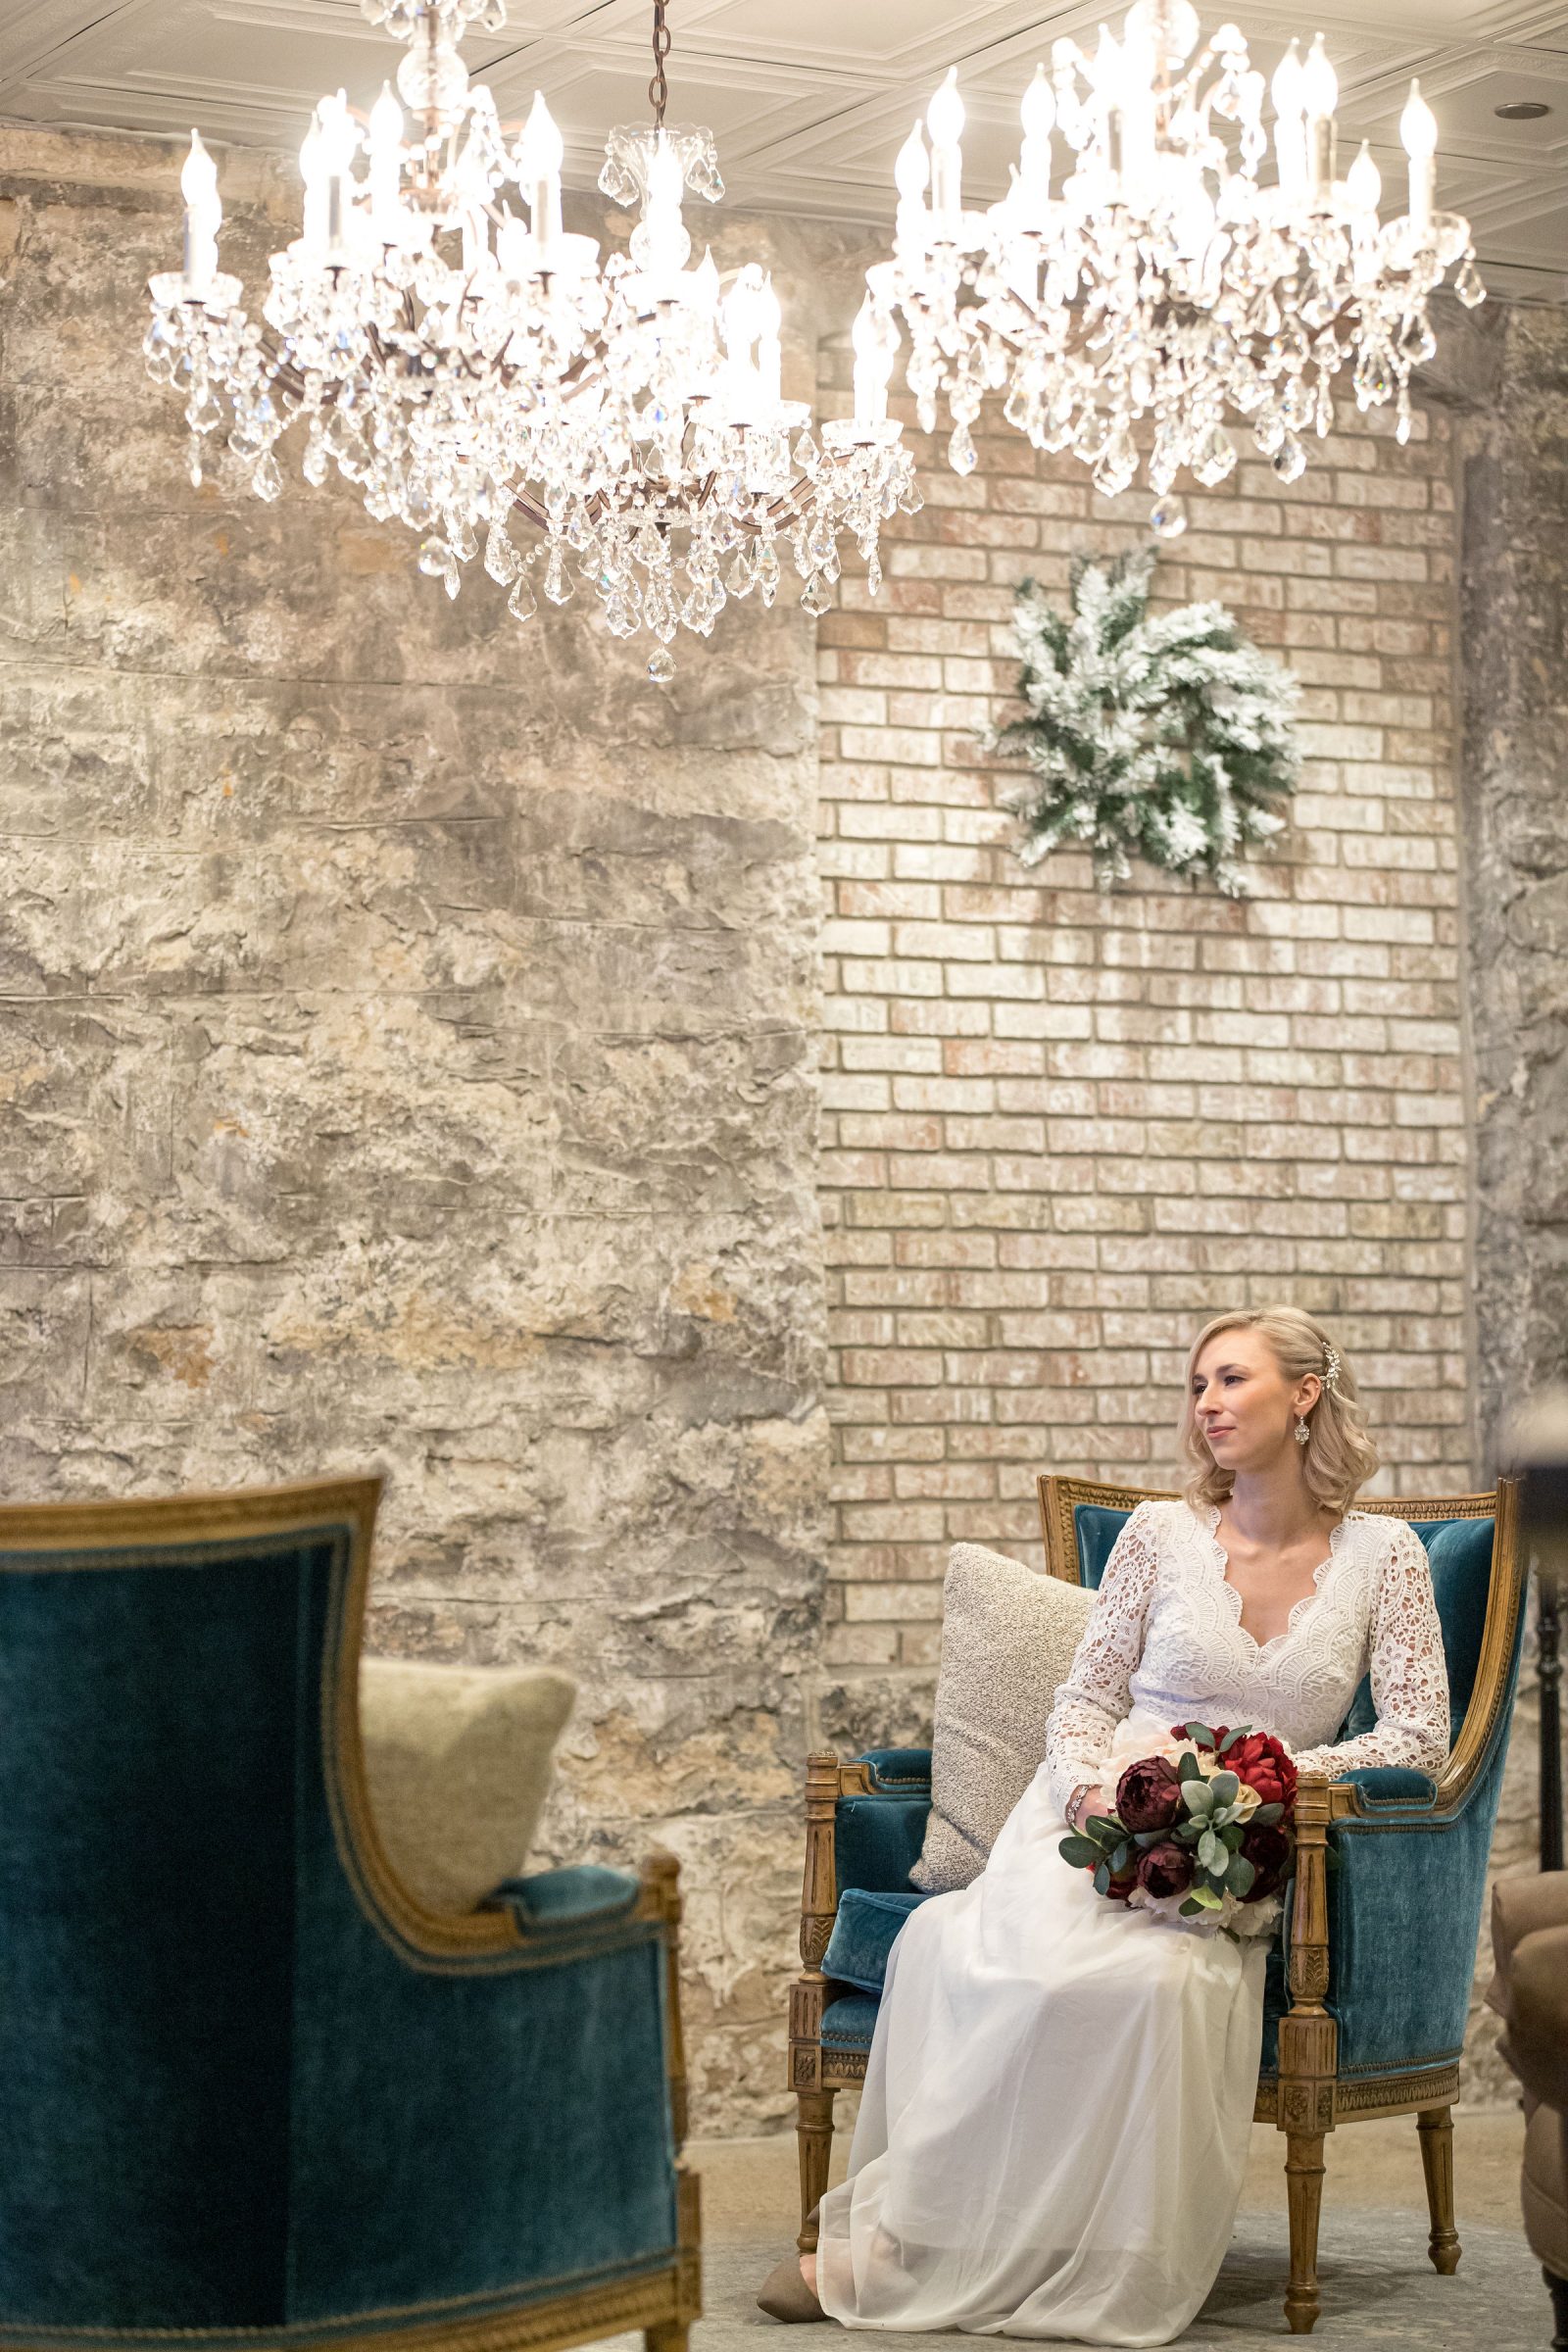 Bride sits in front of historic brick wall with two chandeliers about her at St. James Hotel